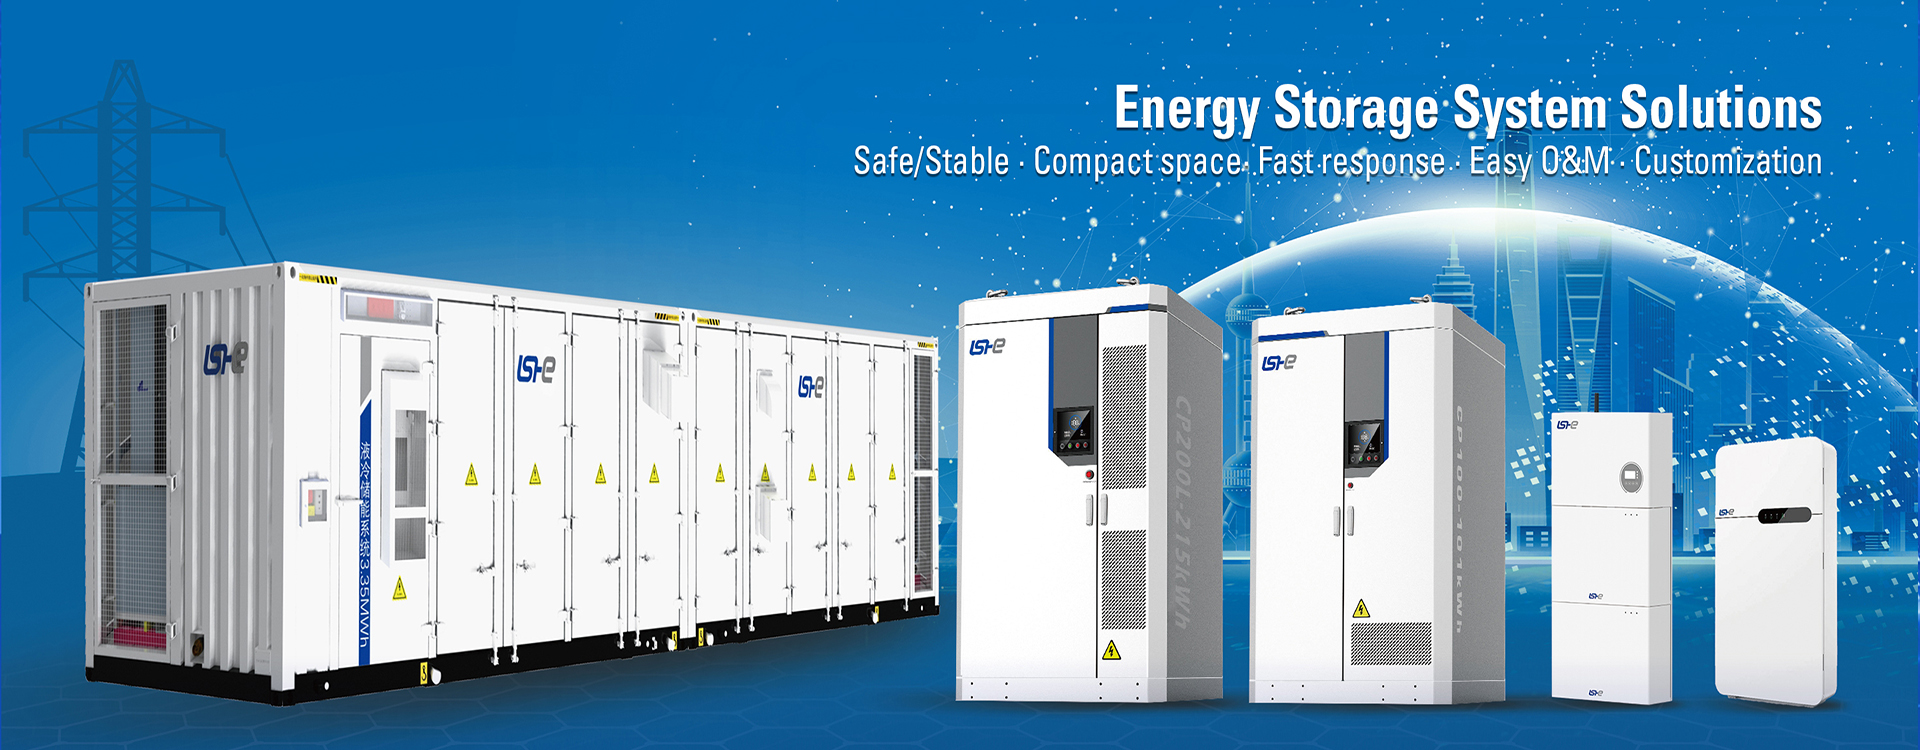 Energy Storage System Solutions